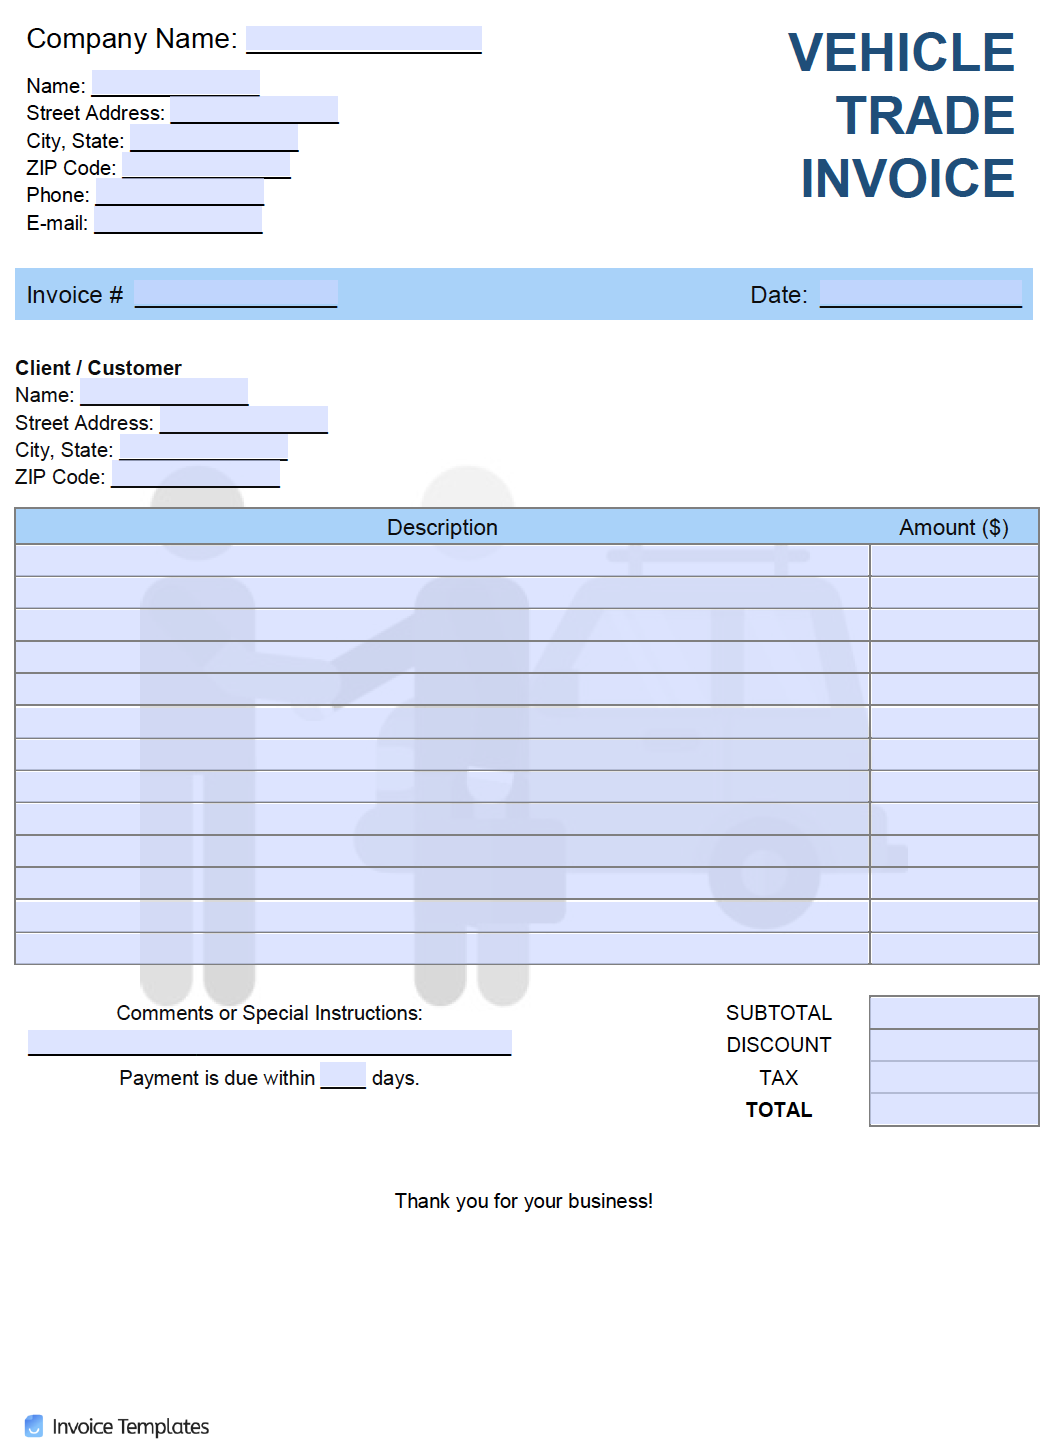 Free Vehicle Trade Invoice Template  PDF  WORD  EXCEL For Car Sales Invoice Template Free Download